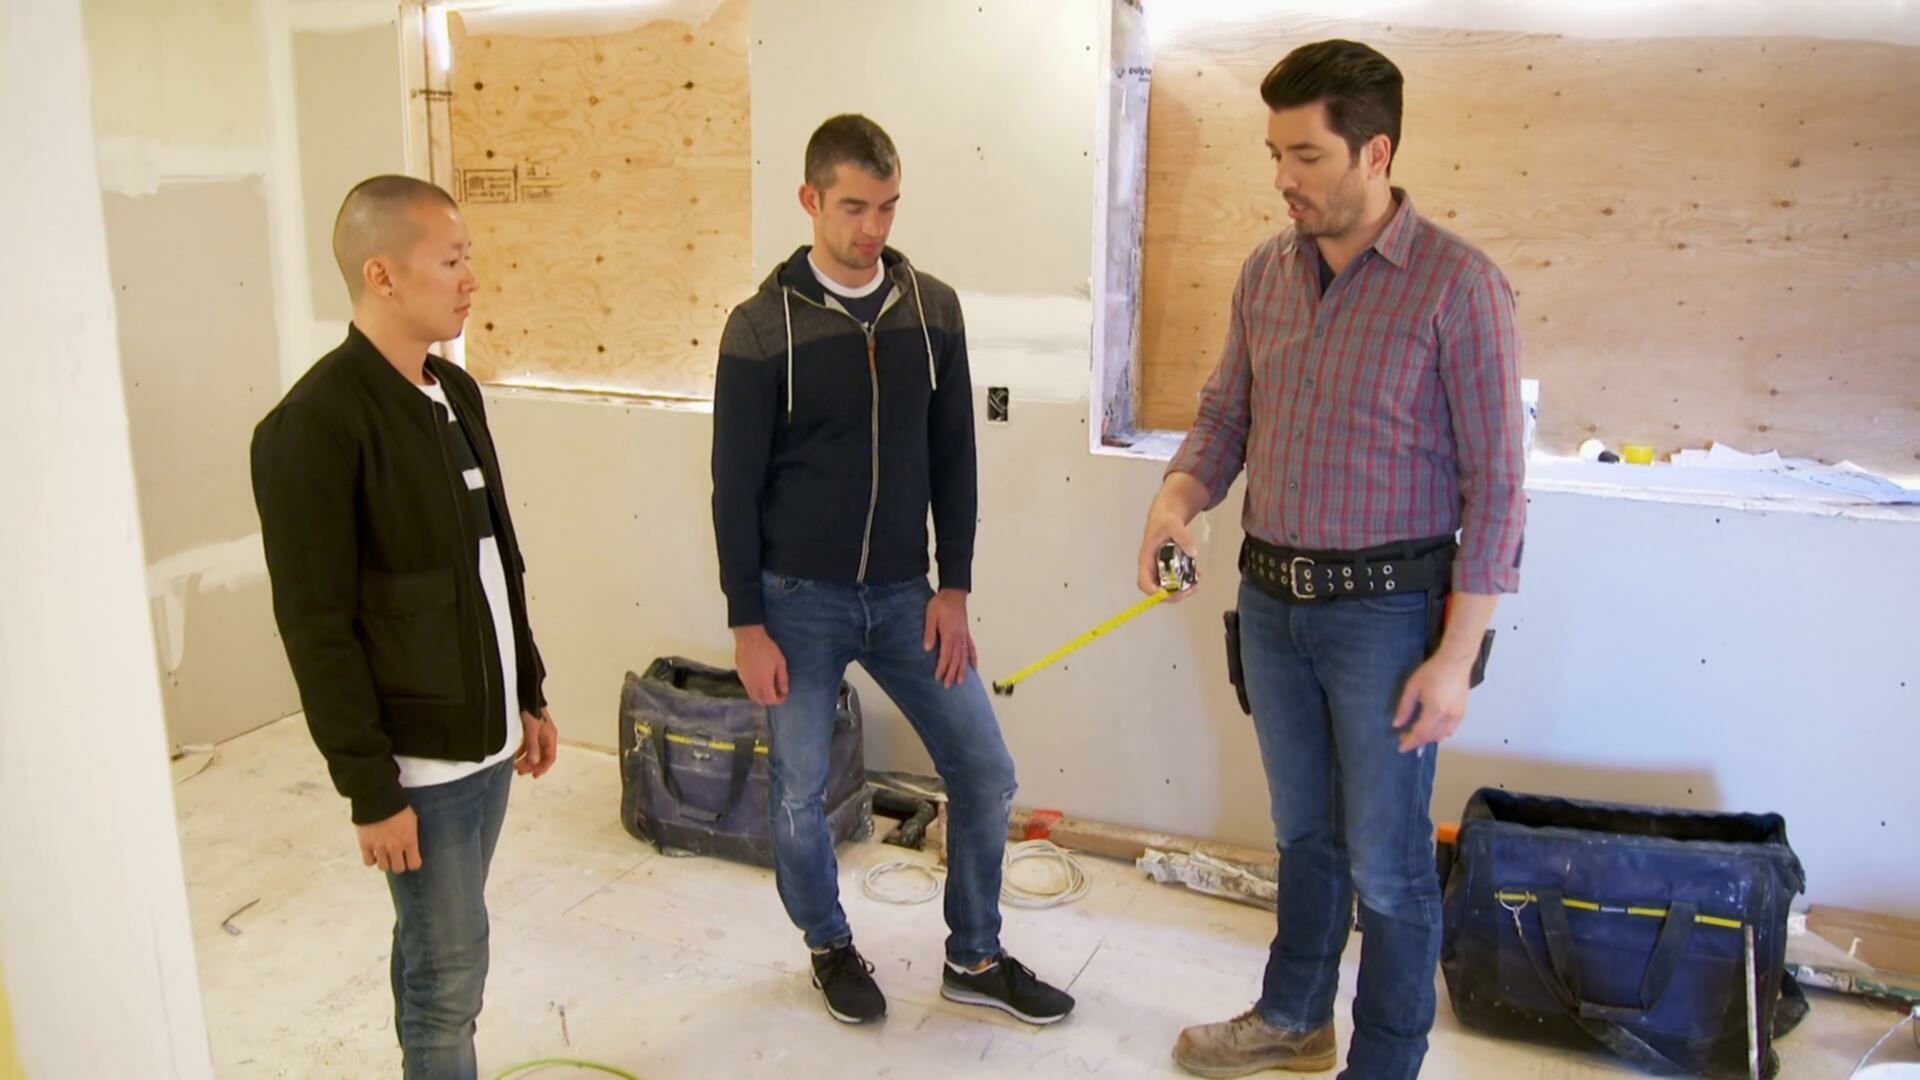 Property Brothers S10E13 Modern Masterpiece for Two Andrew and Phil 1080p MAX WEB DL DDP2 0 H 264 NT